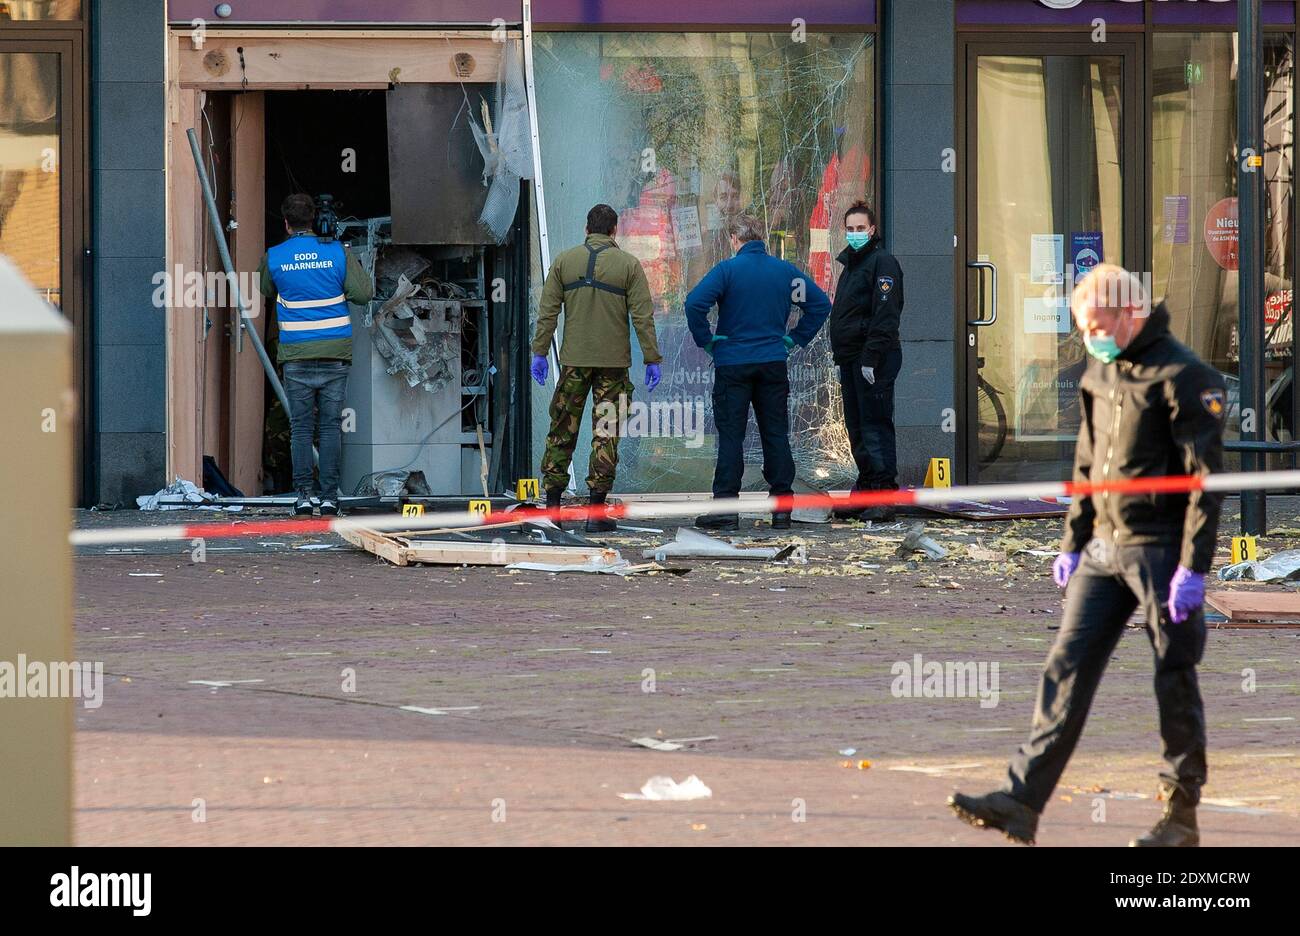 ENSCHEDE, NETHERLANDS - NOV 20, 2020: An explosion in an ATM machine causes huge damage. Police is investigating the case. Stock Photo